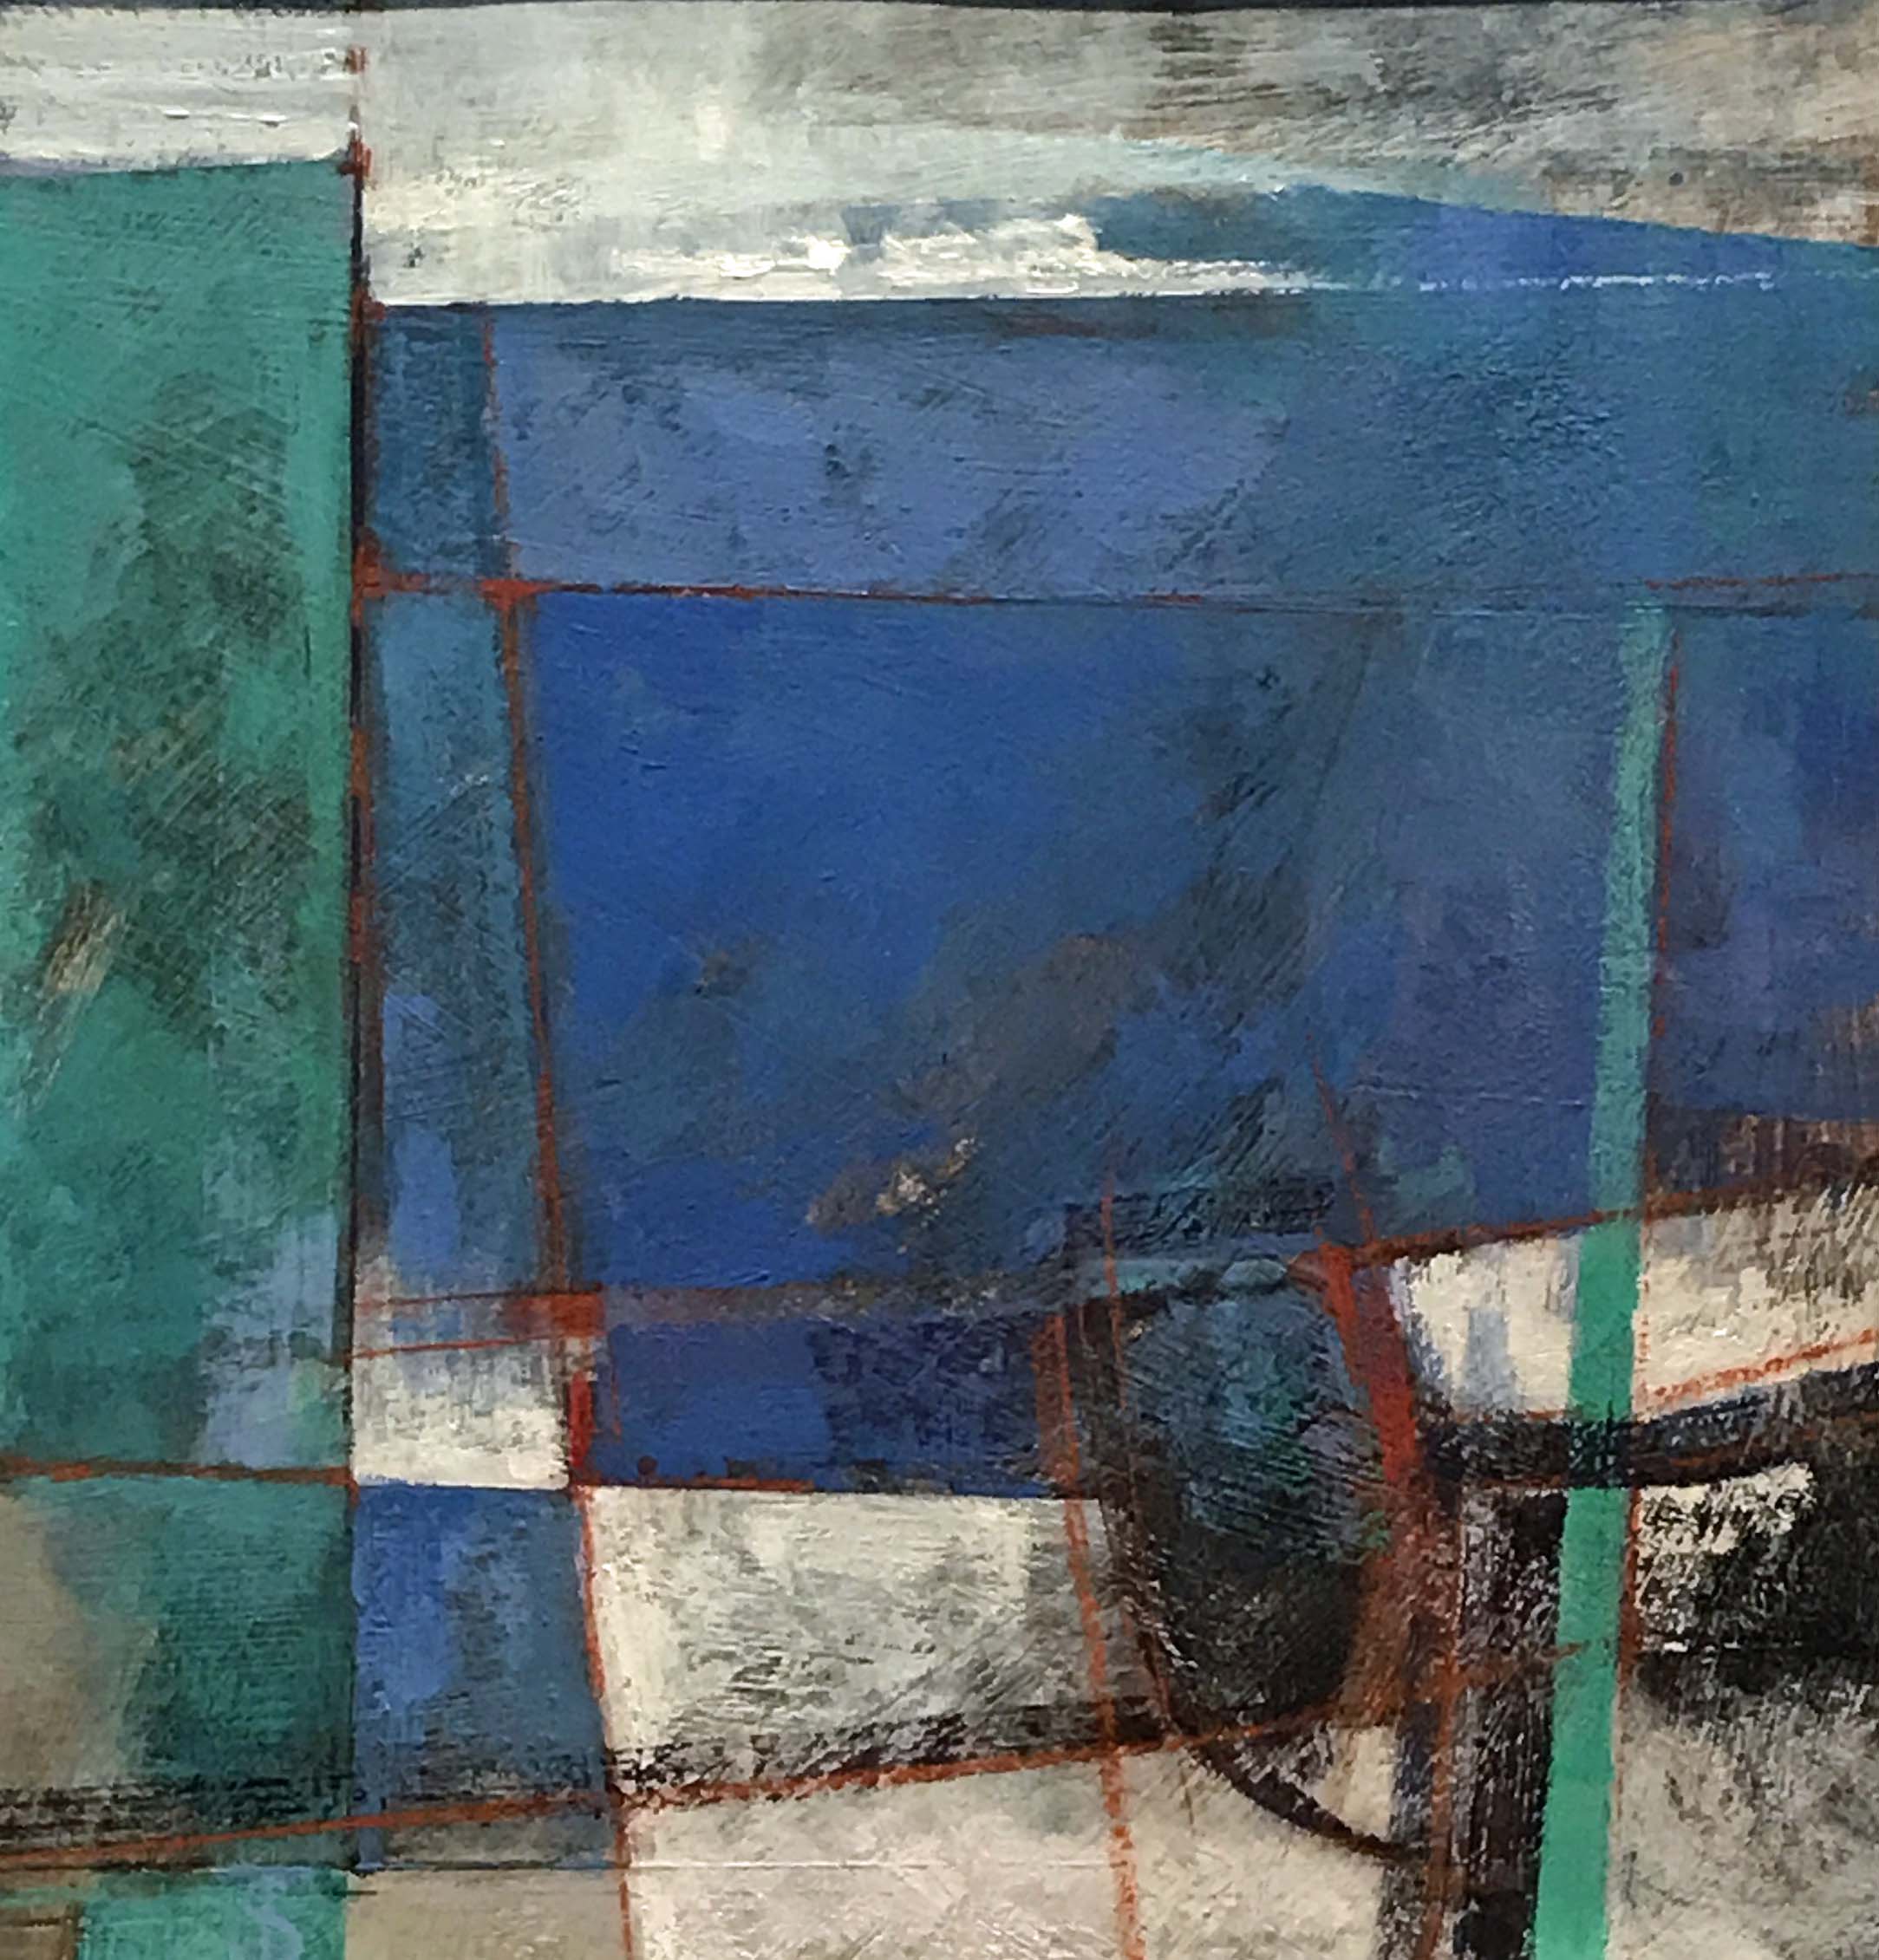 Sheila Tolley (1939-)Cornish Blue, oil on paper, signed,8.5" x 8".